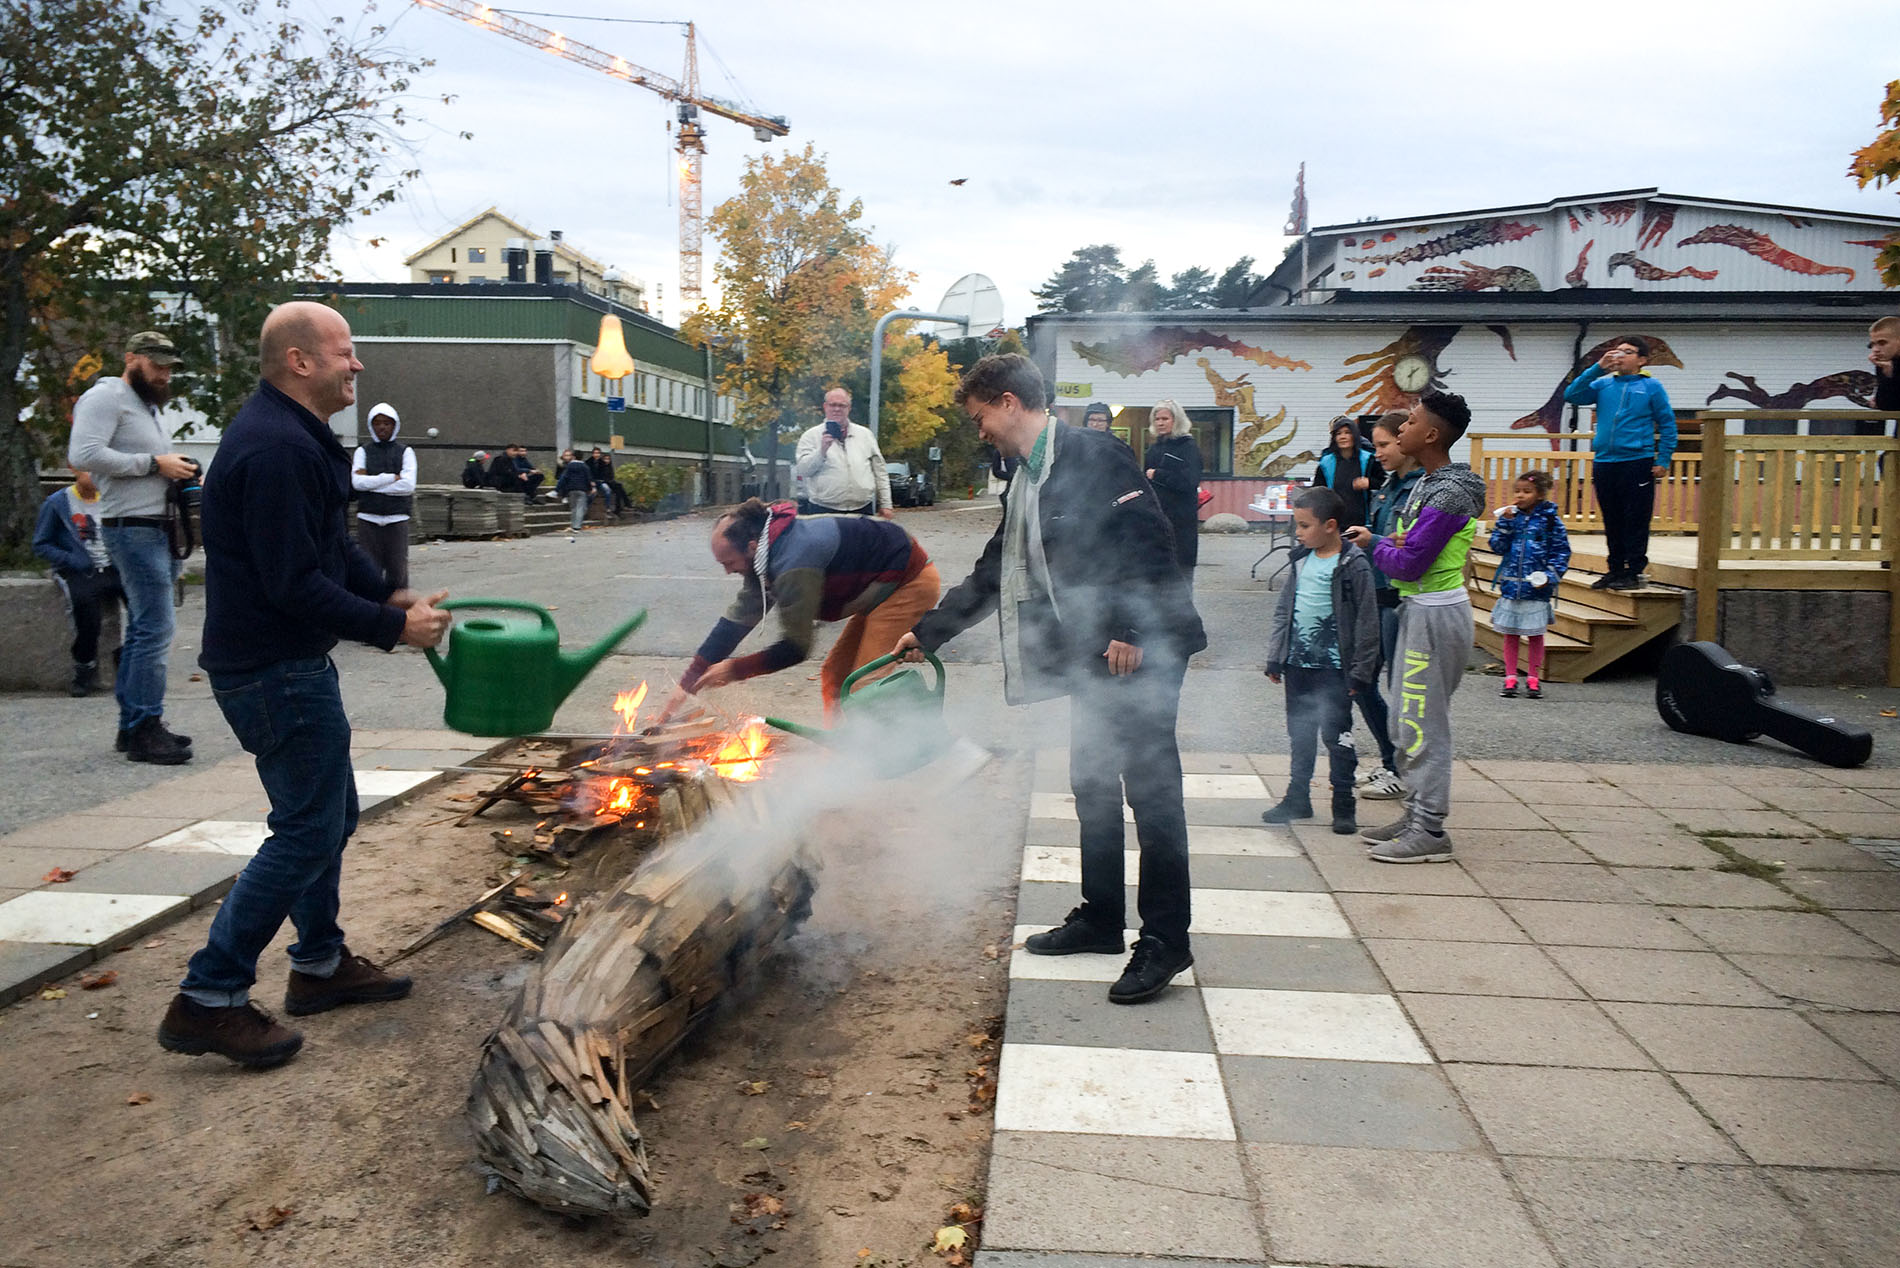 People gathered in front of a small fire. Parts of the artwork are burnt.